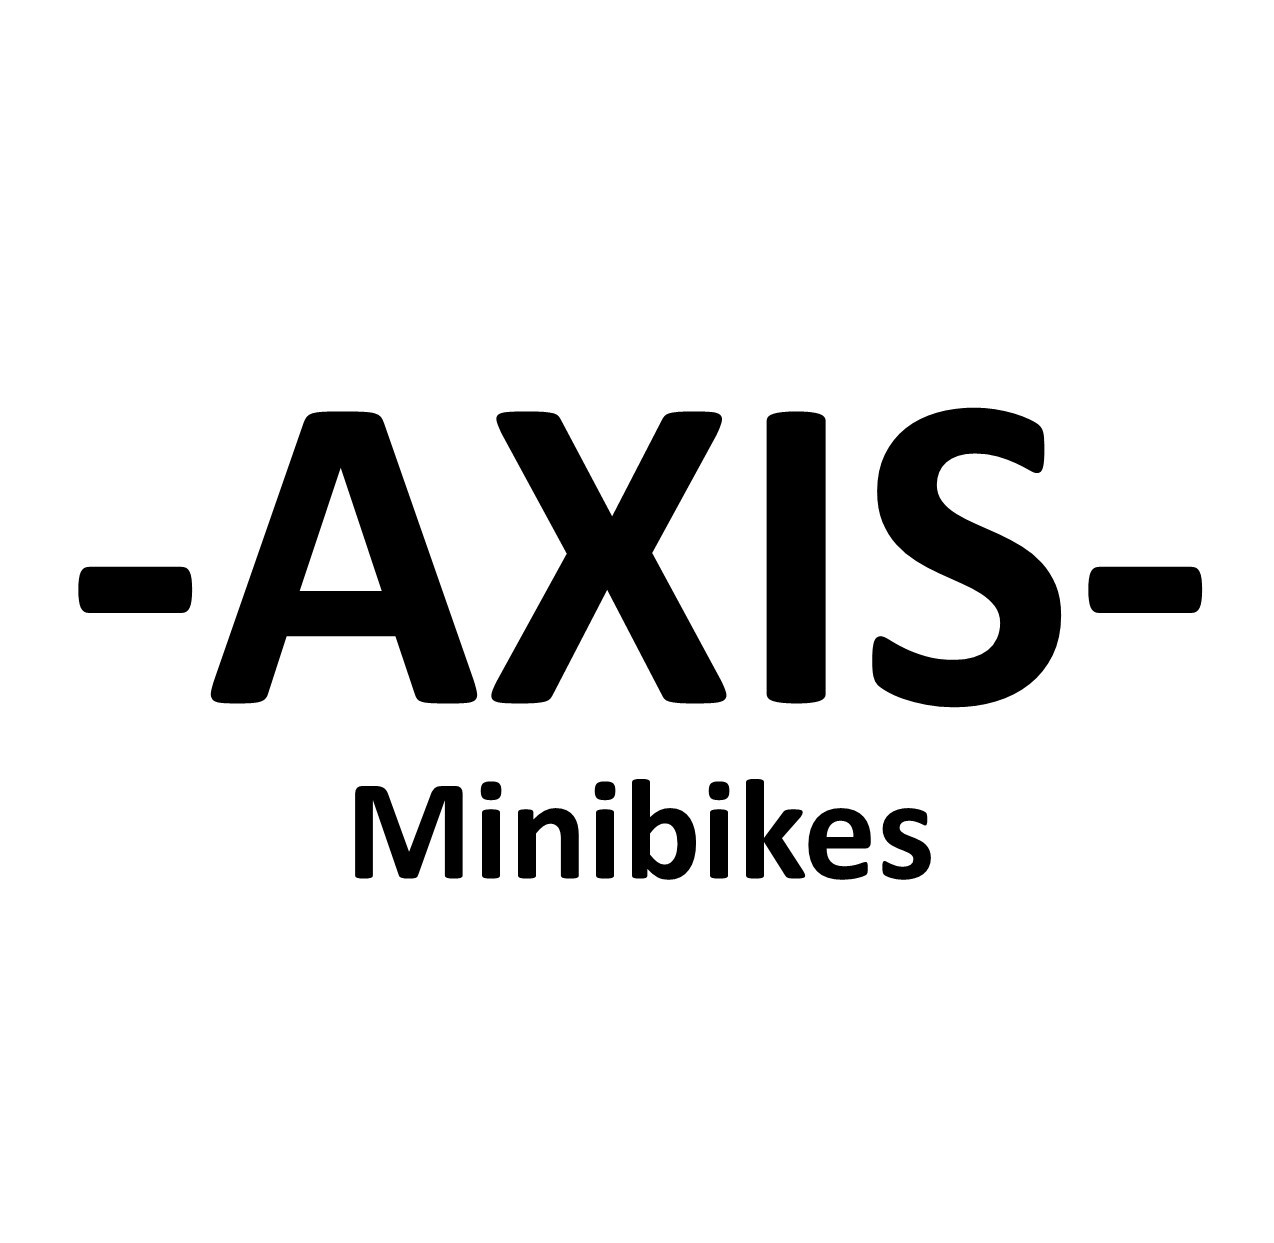 AXIS Motorsports